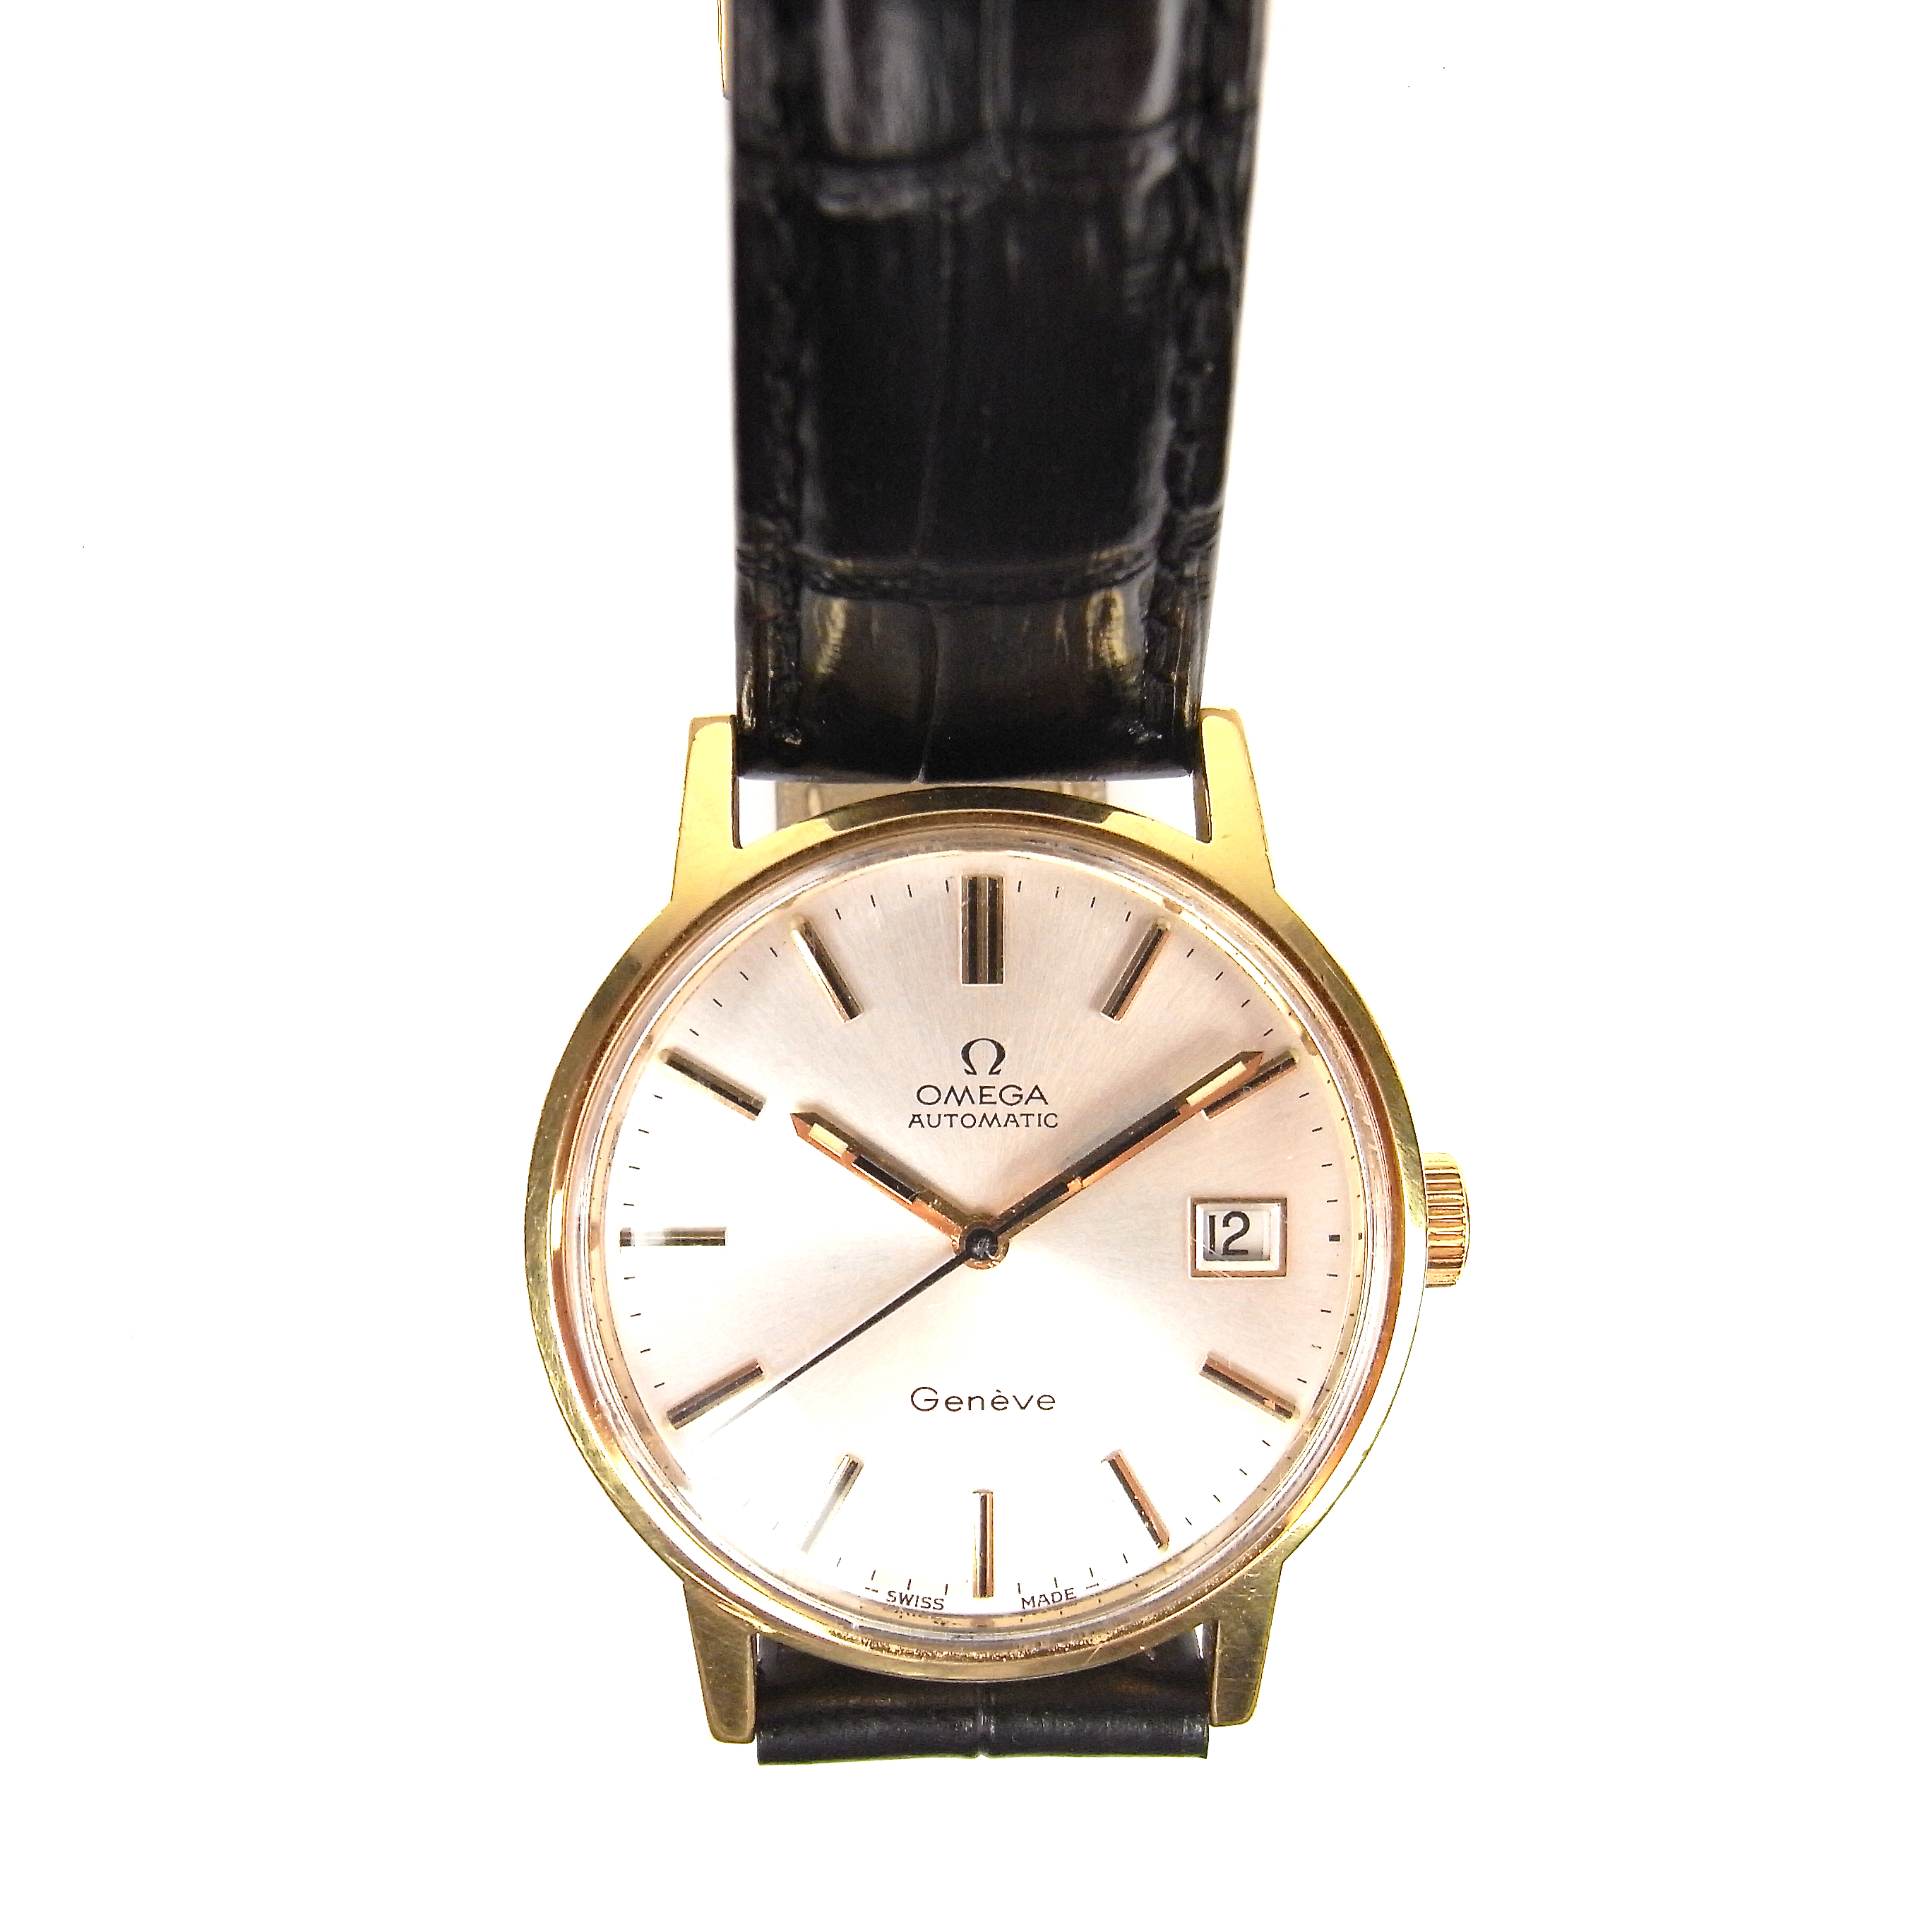 Omega Genève gold plated automatic watch.